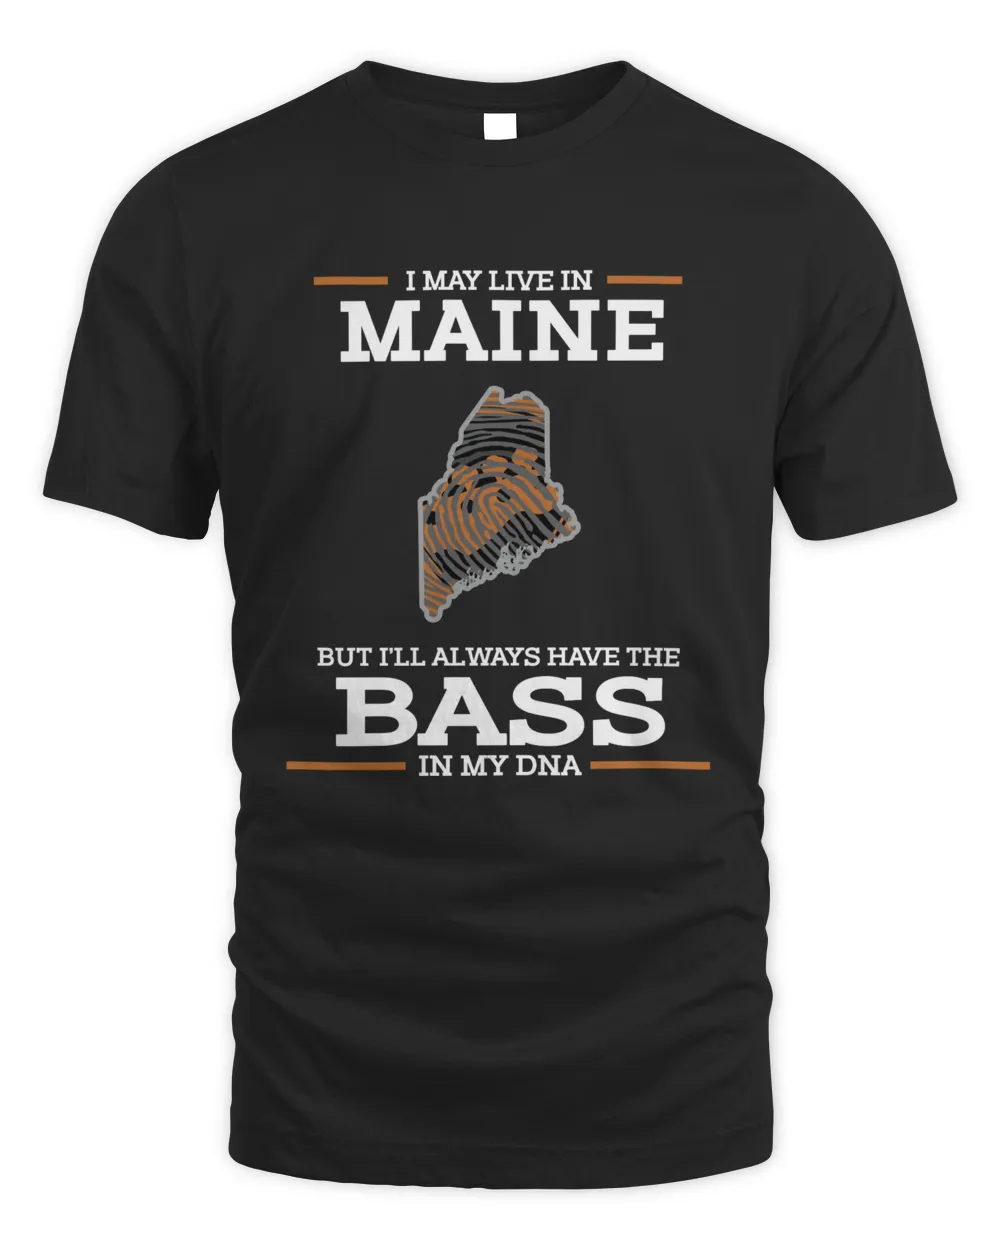 I may live in Maine